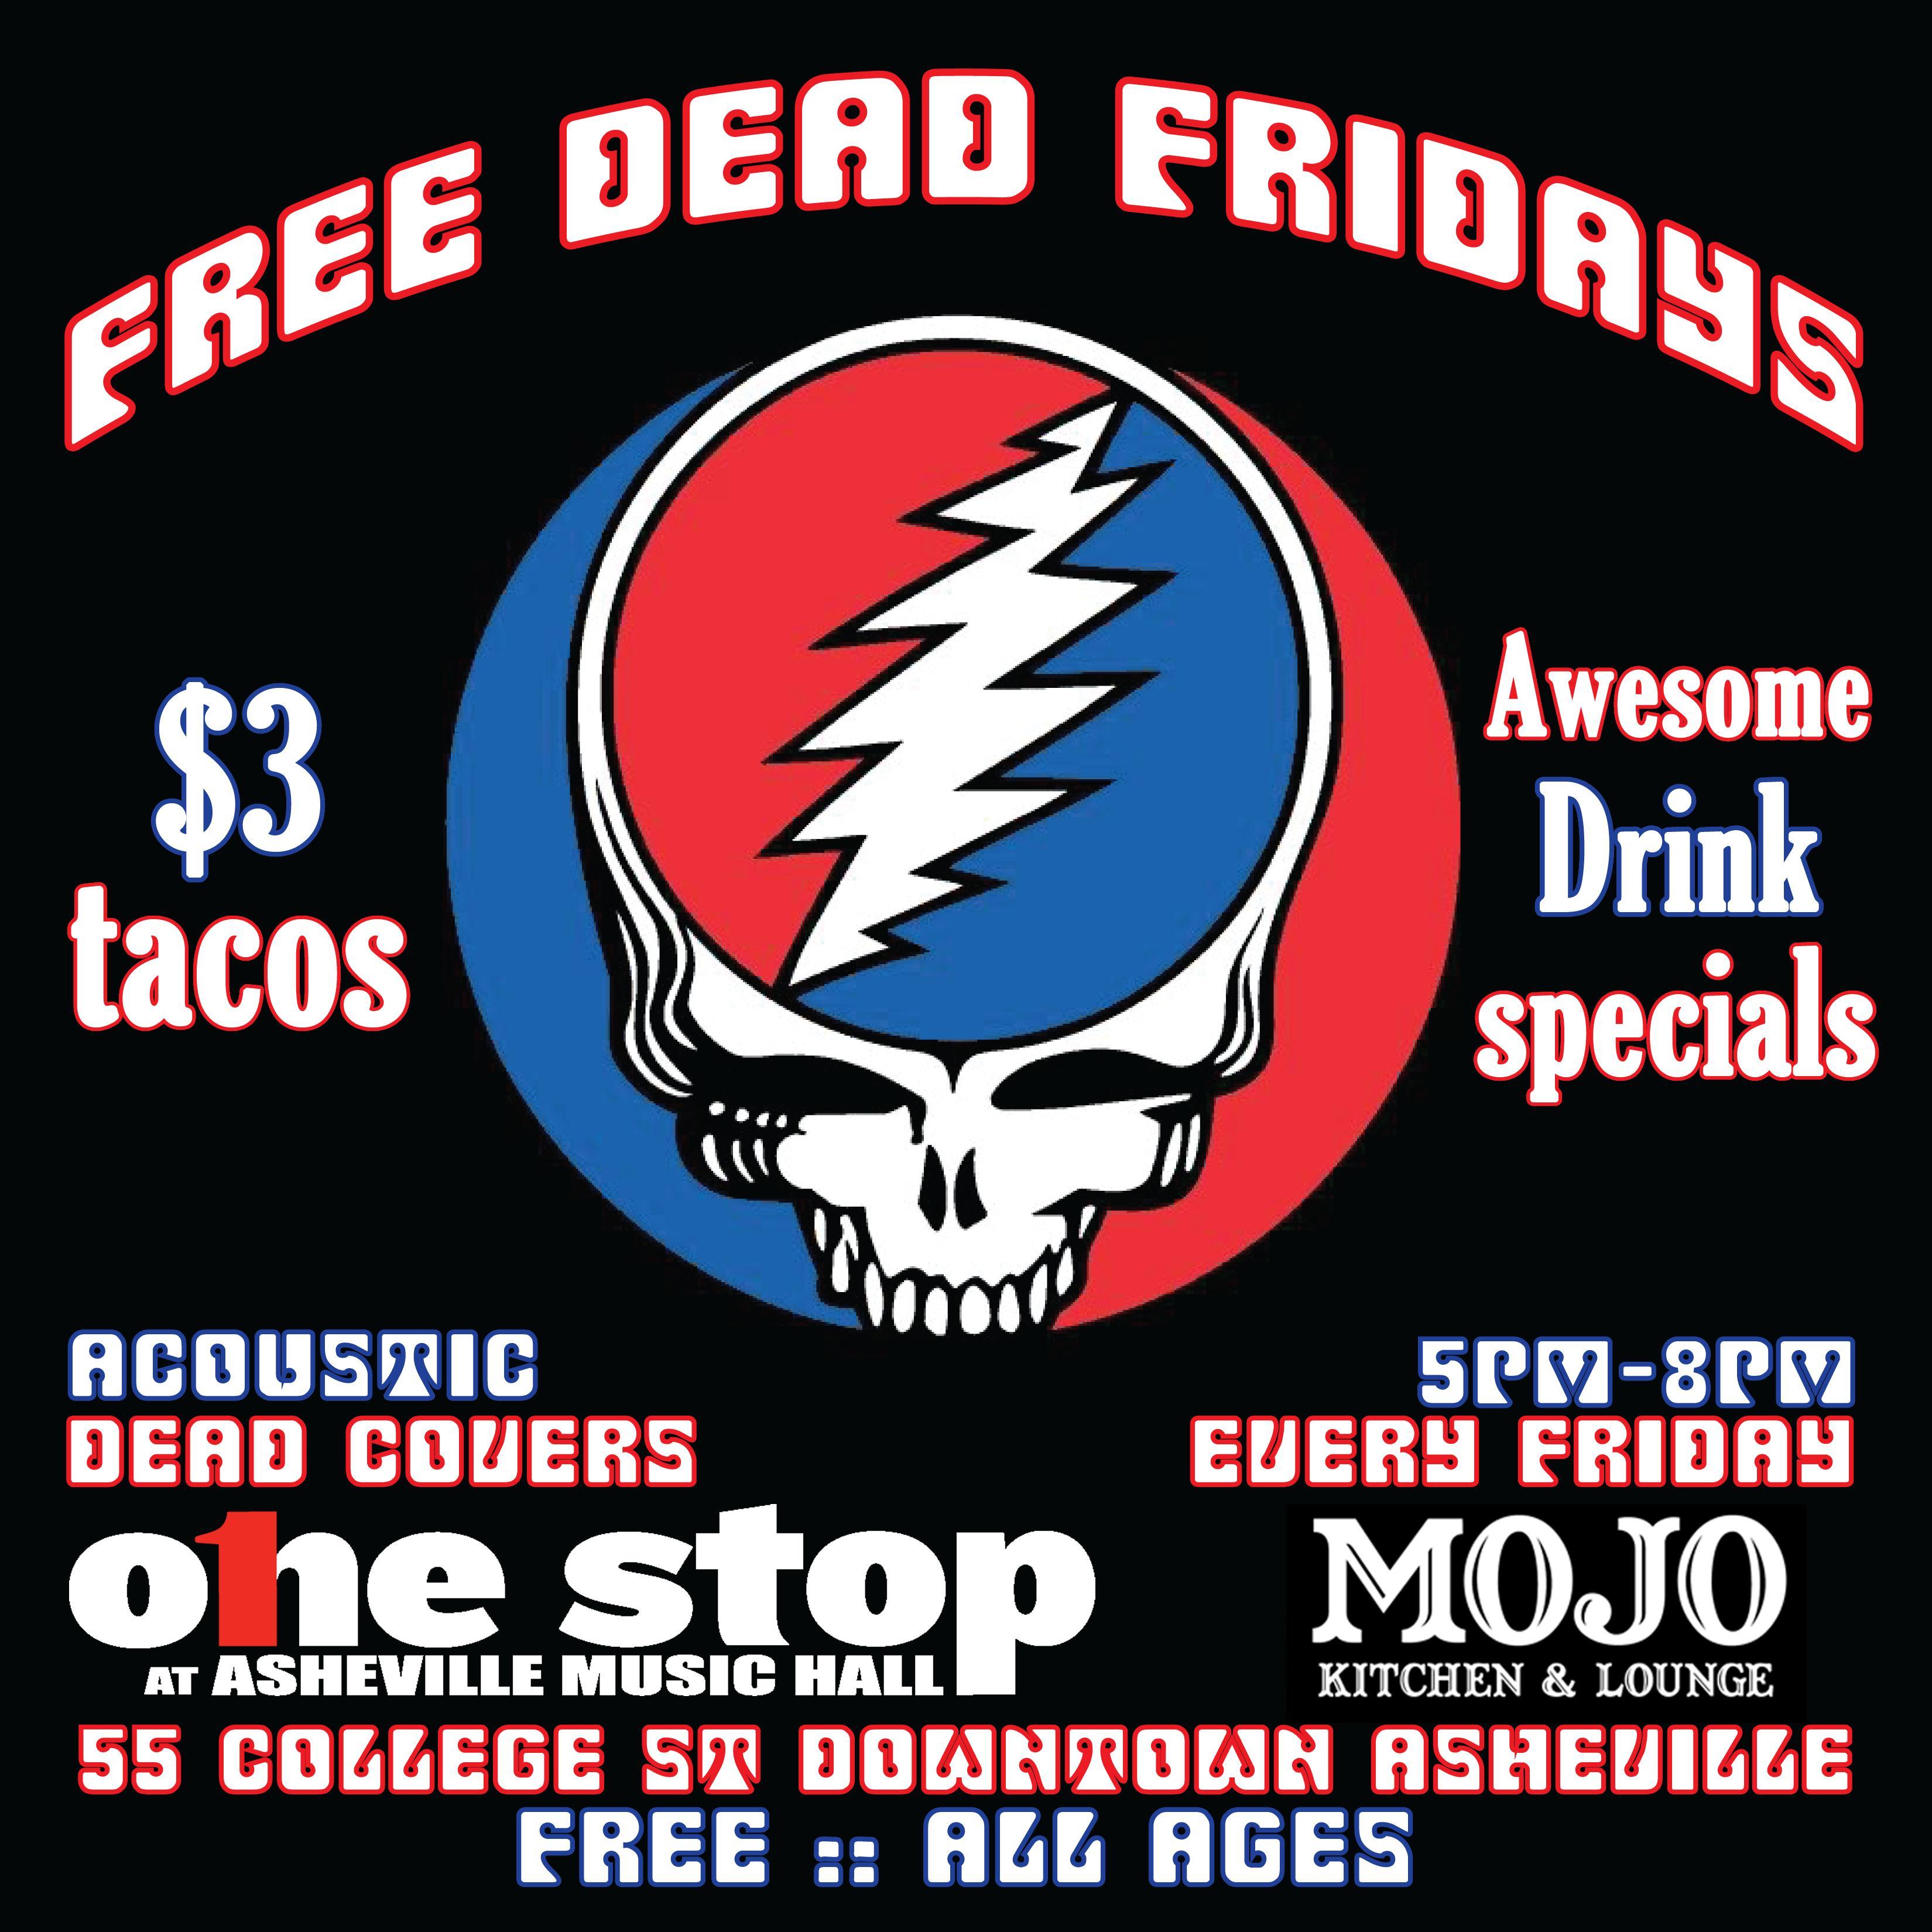 FREE DEAD FRIDAYS feat. members of Phuncle Sam acoustic